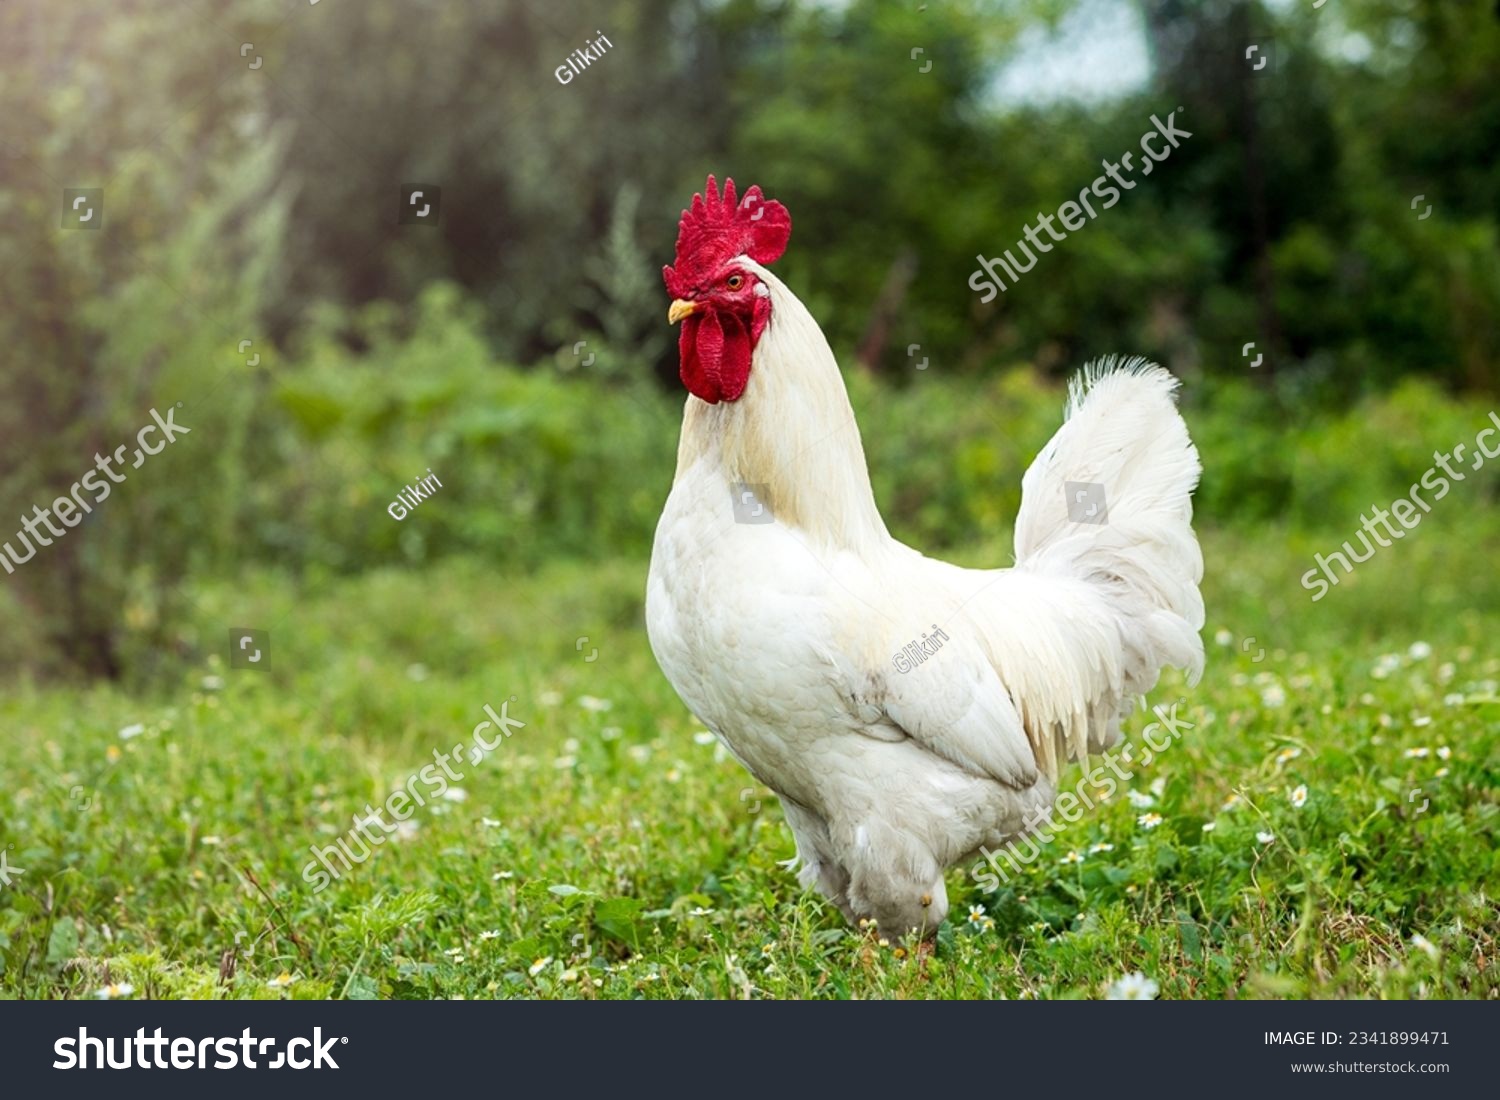 Portrait of a white rooster on a green lawn in sunlight. #2341899471